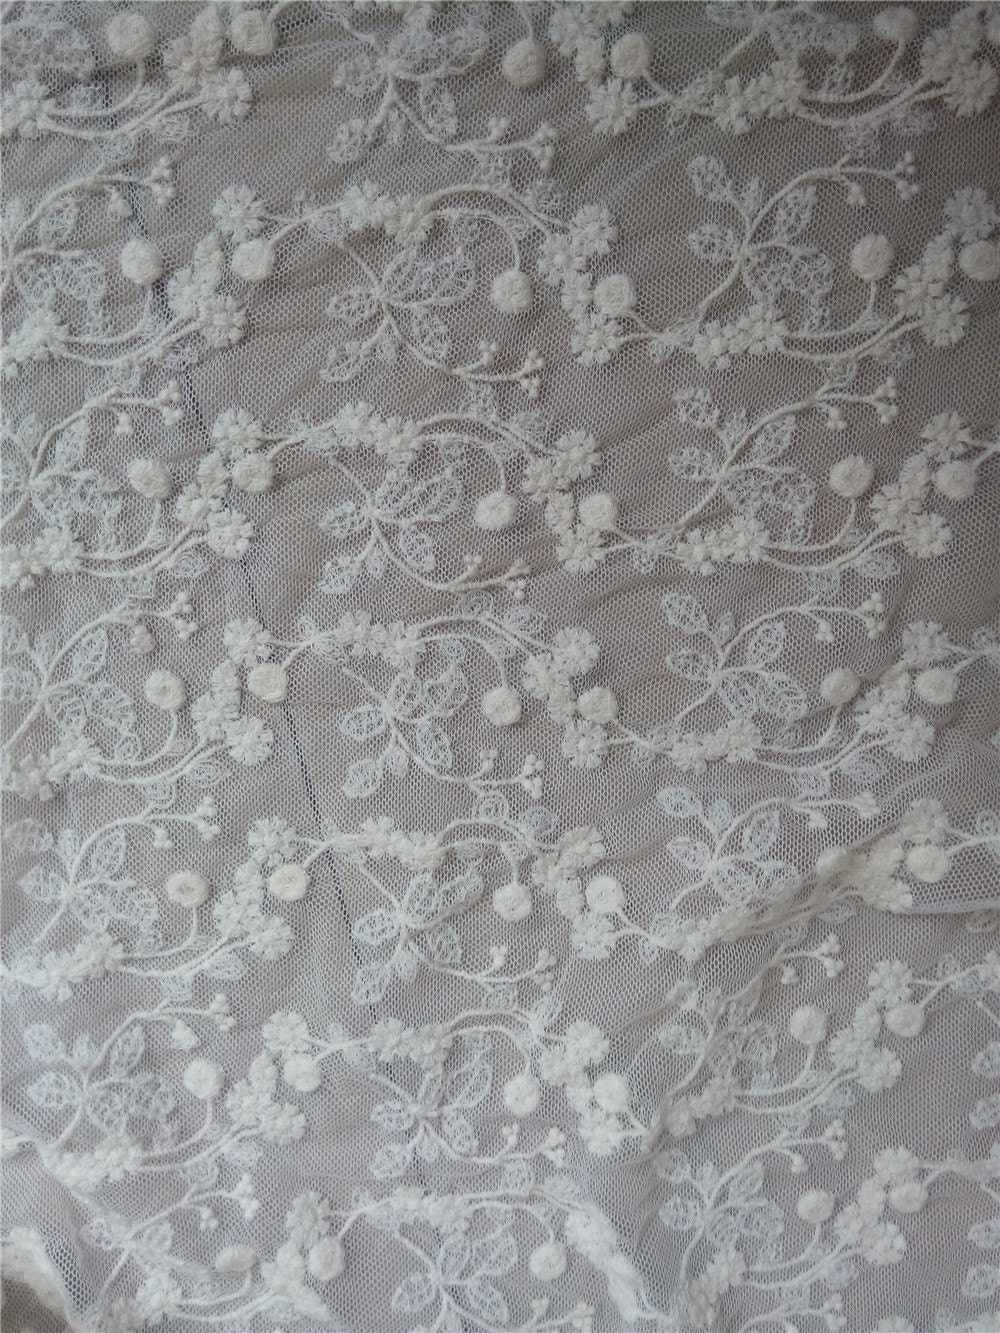 Ivory embroidered lace fabric vintage lace fabric by WellTrimmed